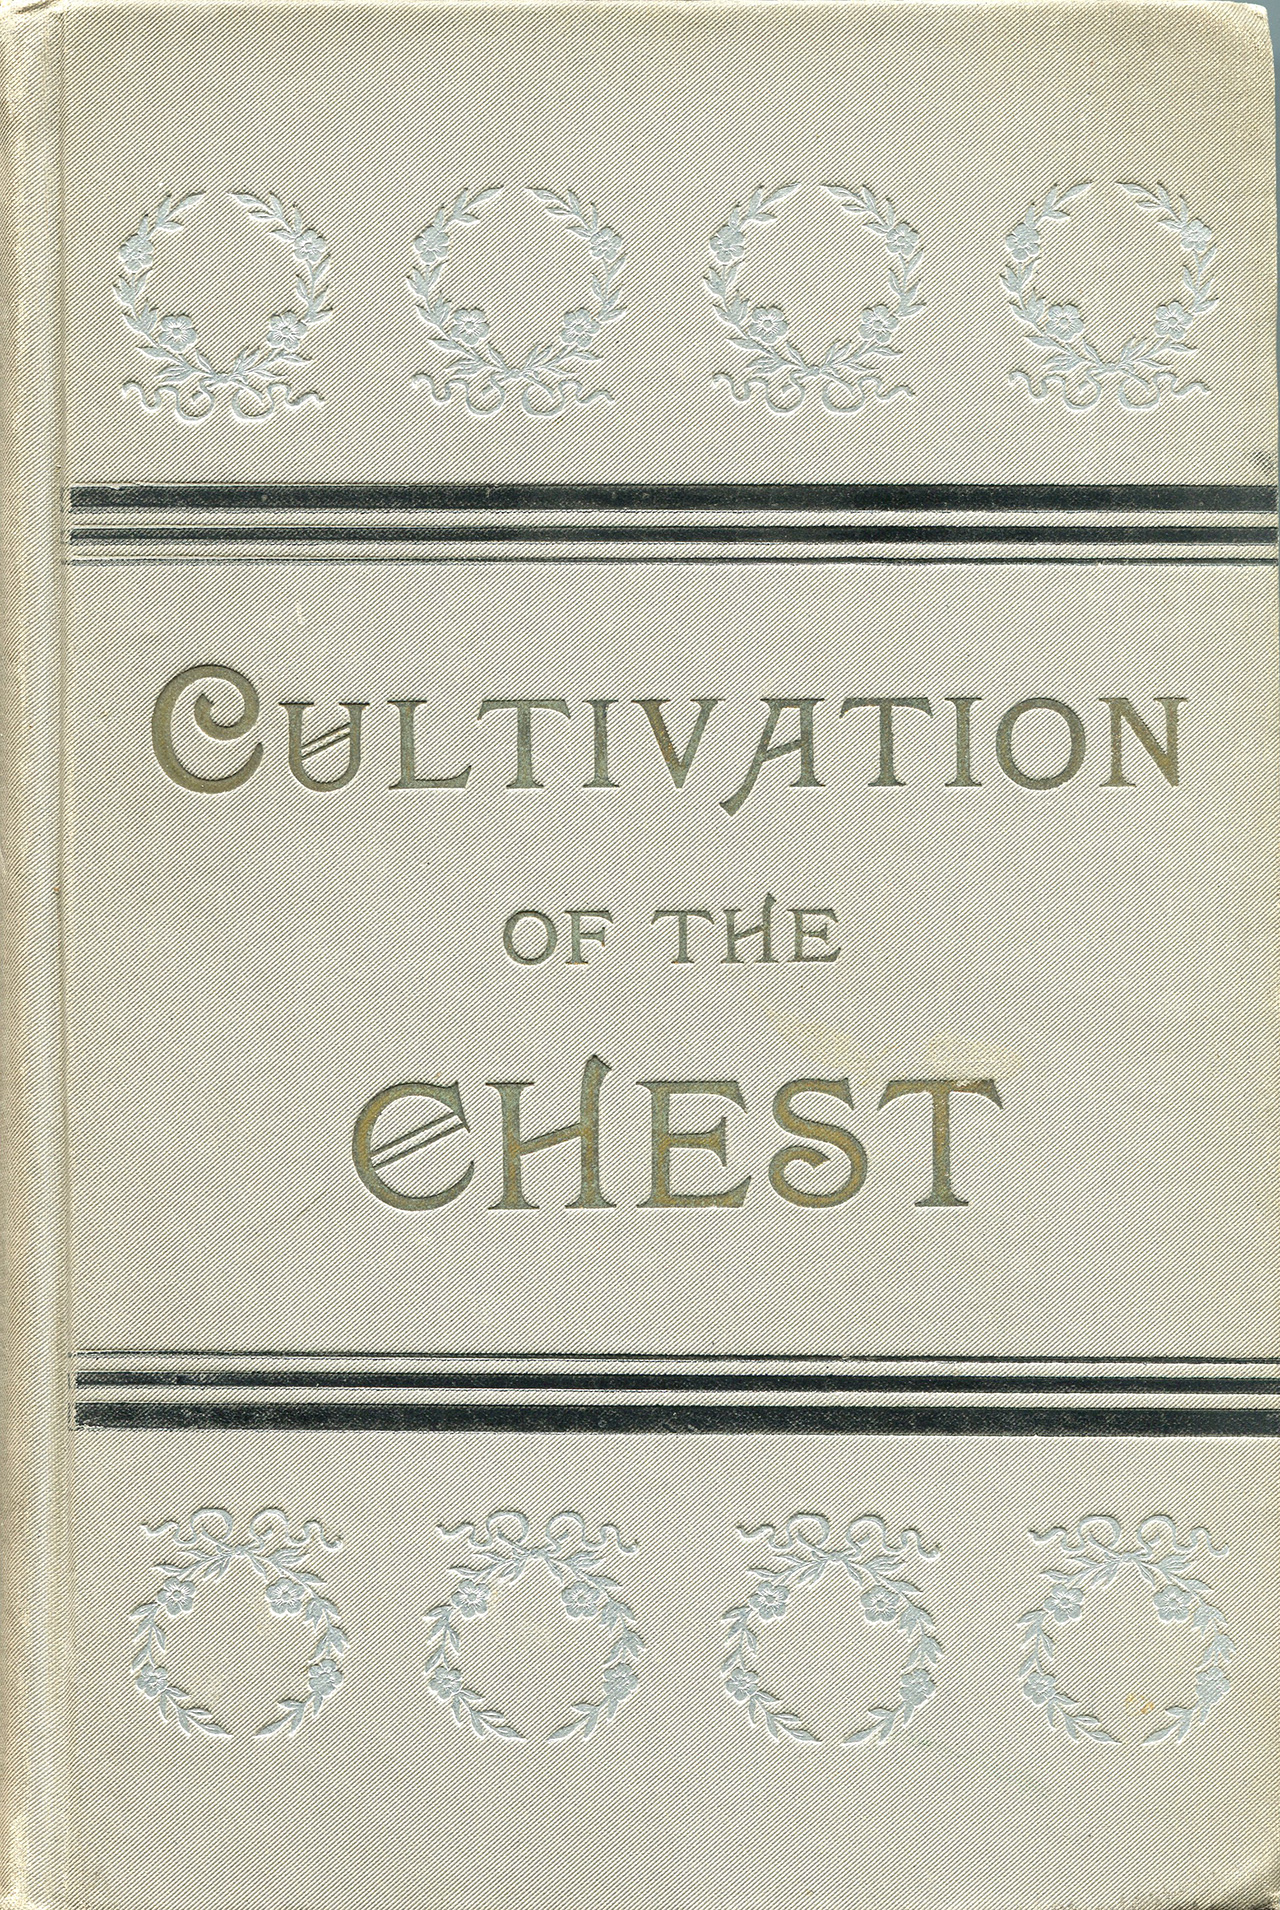 cultivation_of_the_chest.jpg